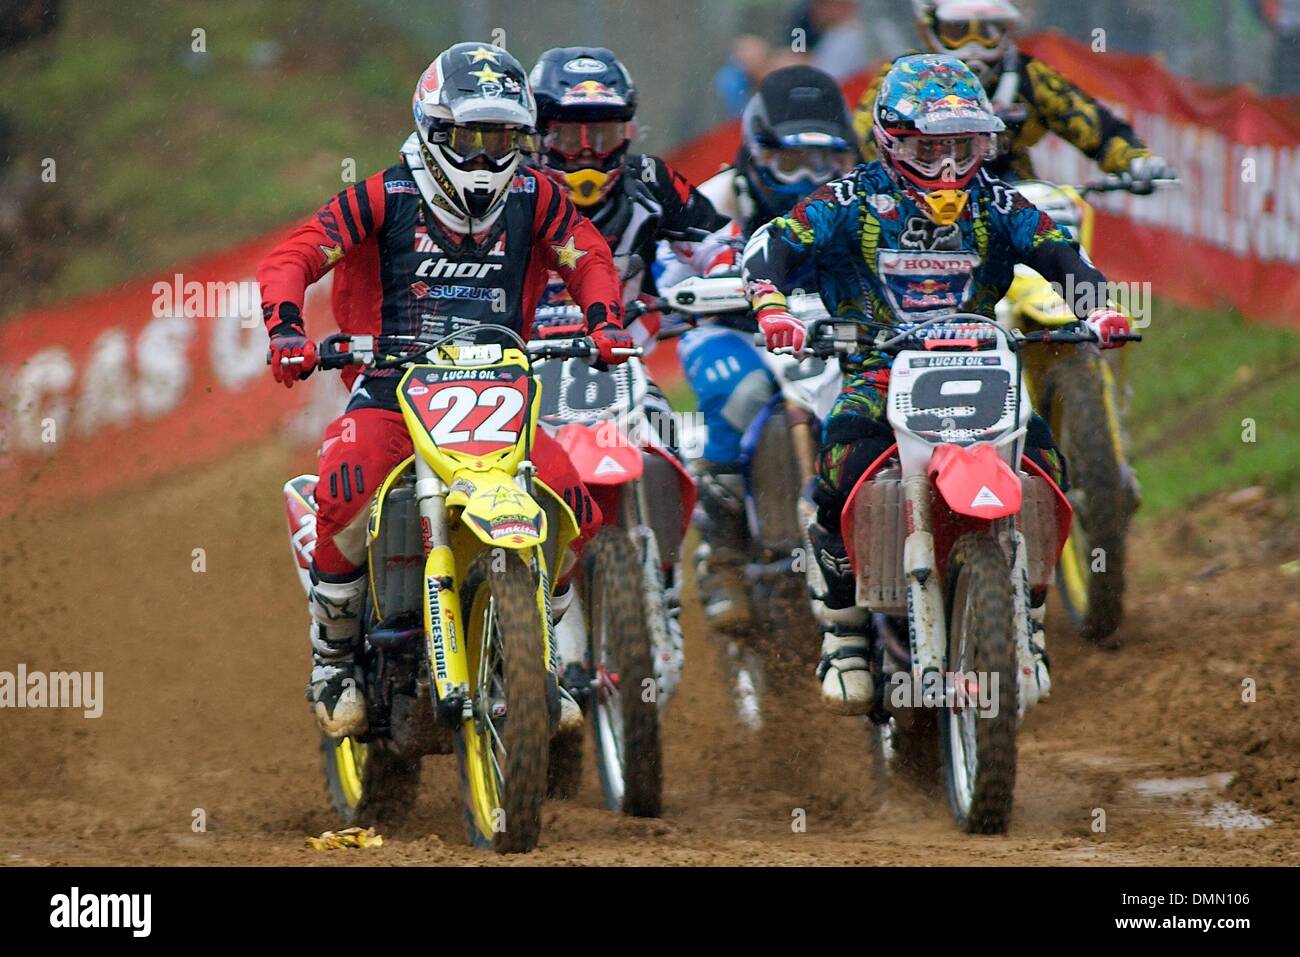 22 August 2009: Chad Reed #22,Davi Millsaps #18,and Ivan Tedesco # 9 during  the Lucas Oil Motocross Championships at Budds Creek Motocross in Budds  Creek , Maryland (Credit Image: © Southcreek Global/ZUMApress.com Stock  Photo - Alamy